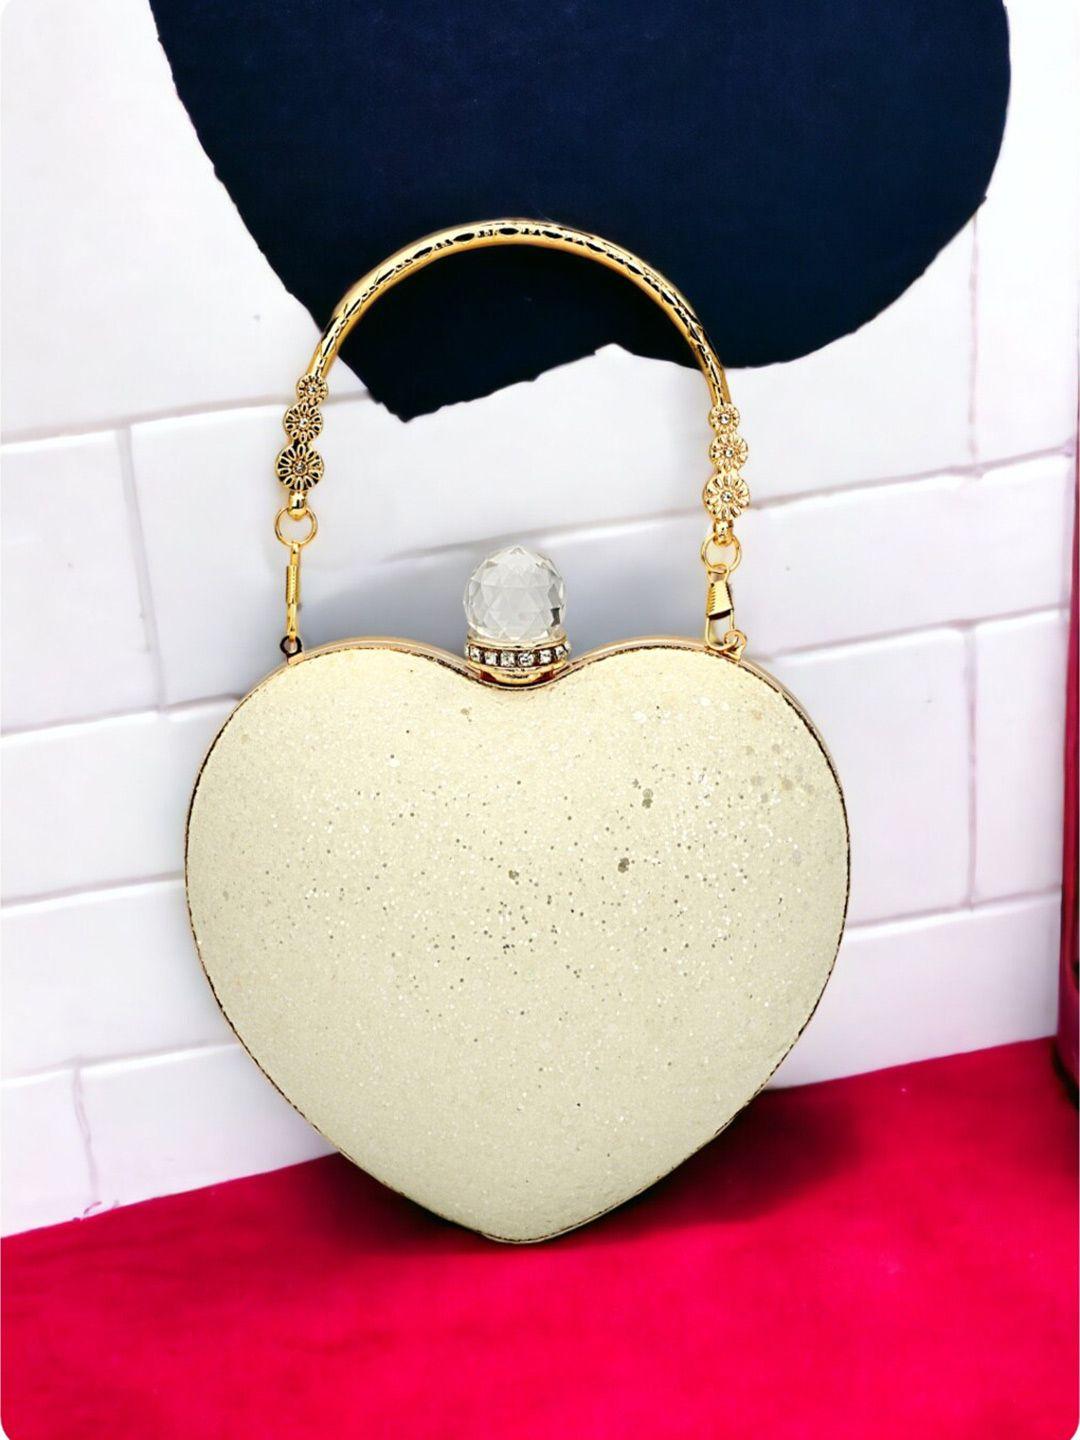 toobacraft embellished heart box clutch